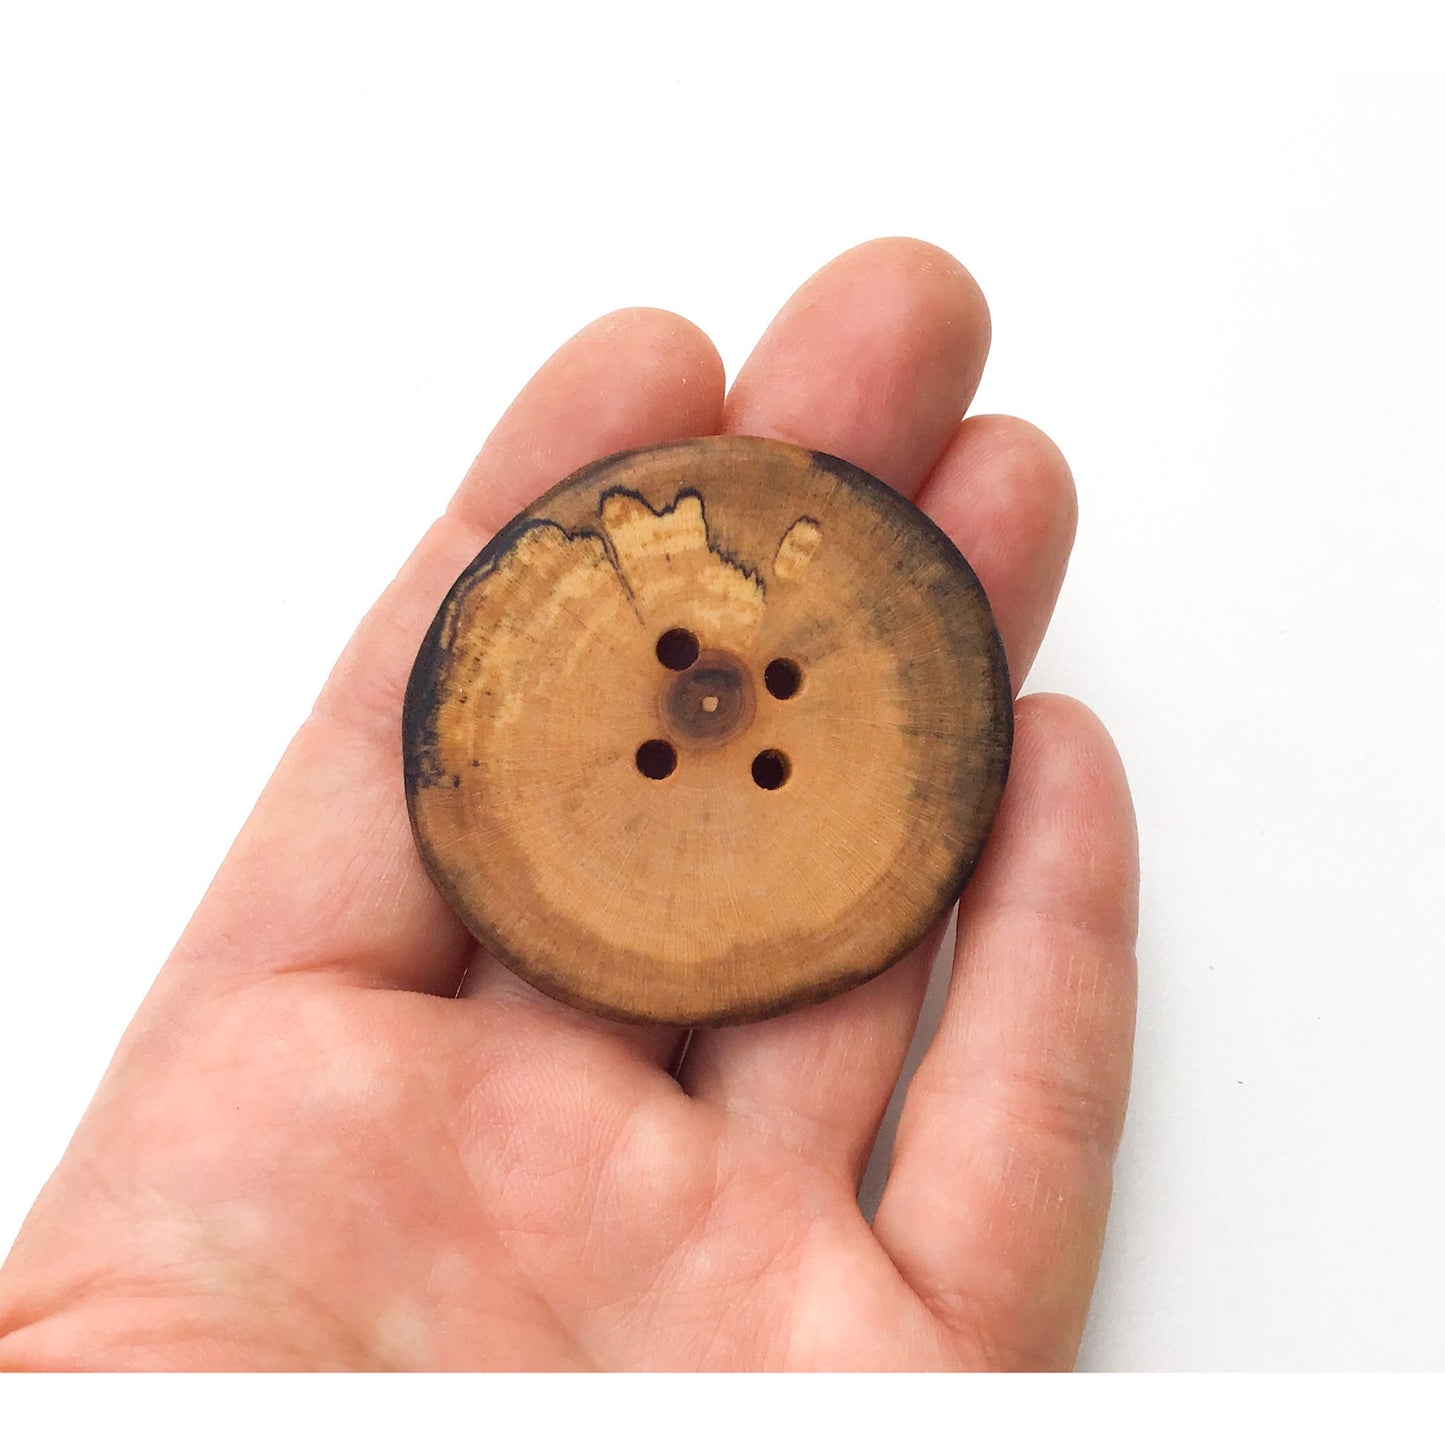 Extra Large Spalted Maple Wood Button - 1 7/8" Maple Wood Button -4 hole